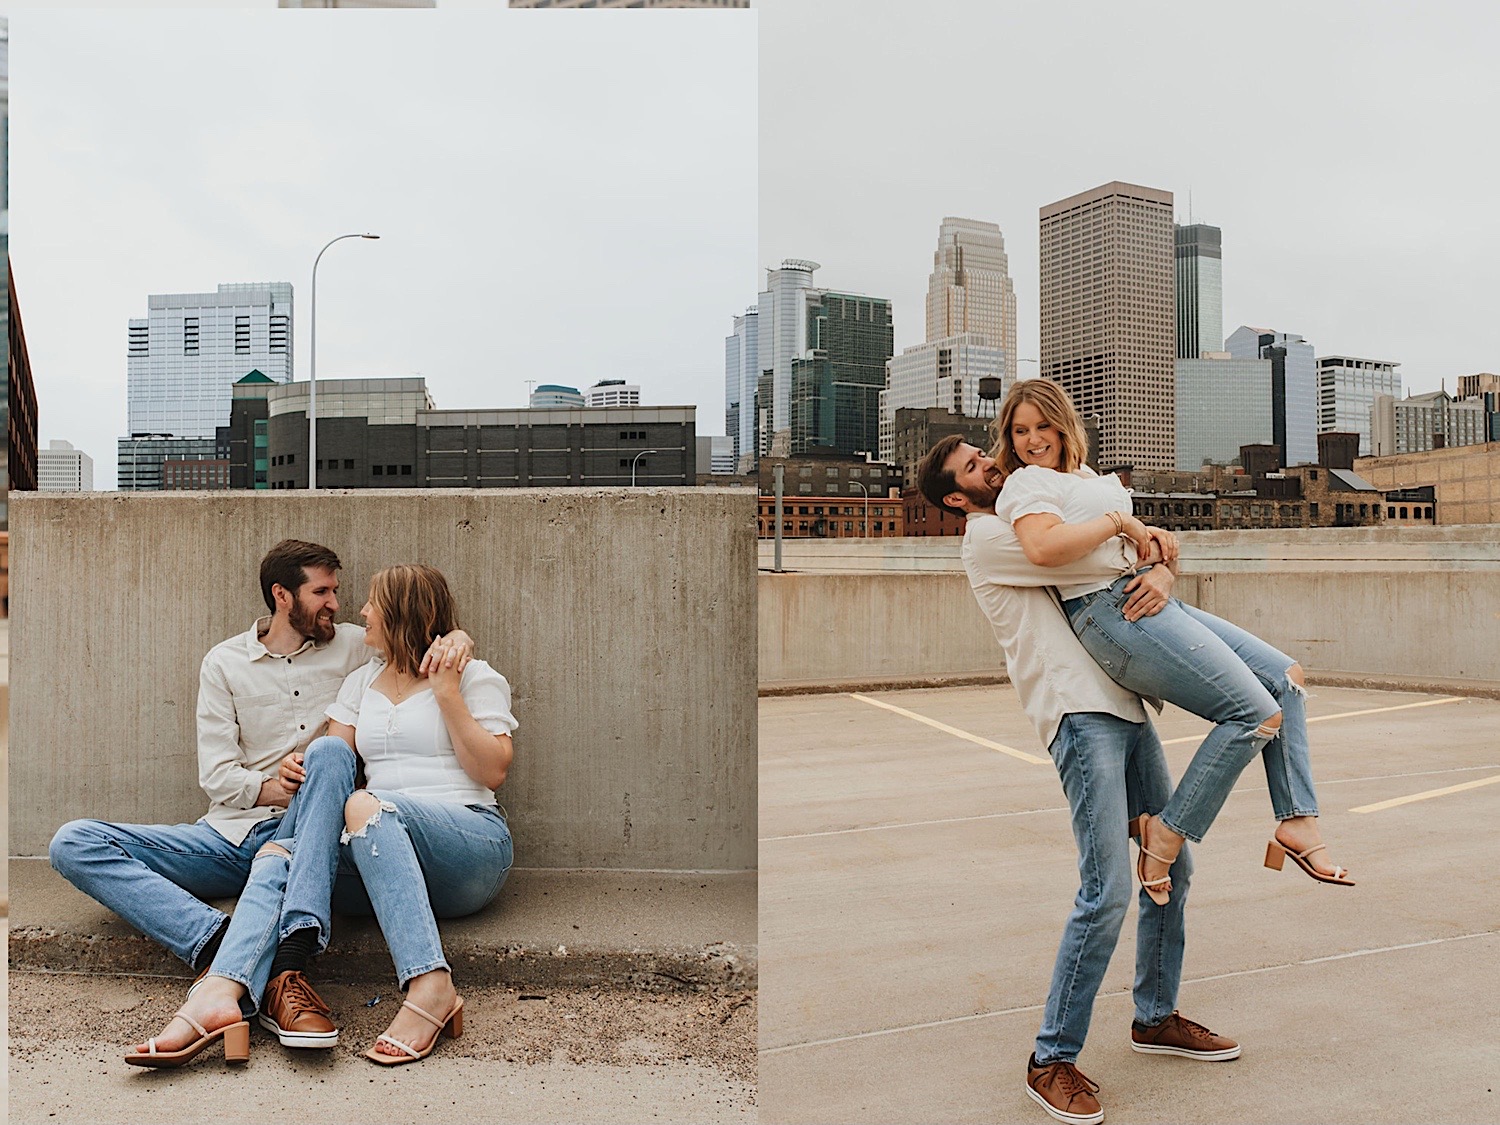 2 photos side by side, the right is of a couple sitting atop a parking garage and smiling at one another, the right is of them in the parking garage and the man is lifting the woman in the air as she smiles